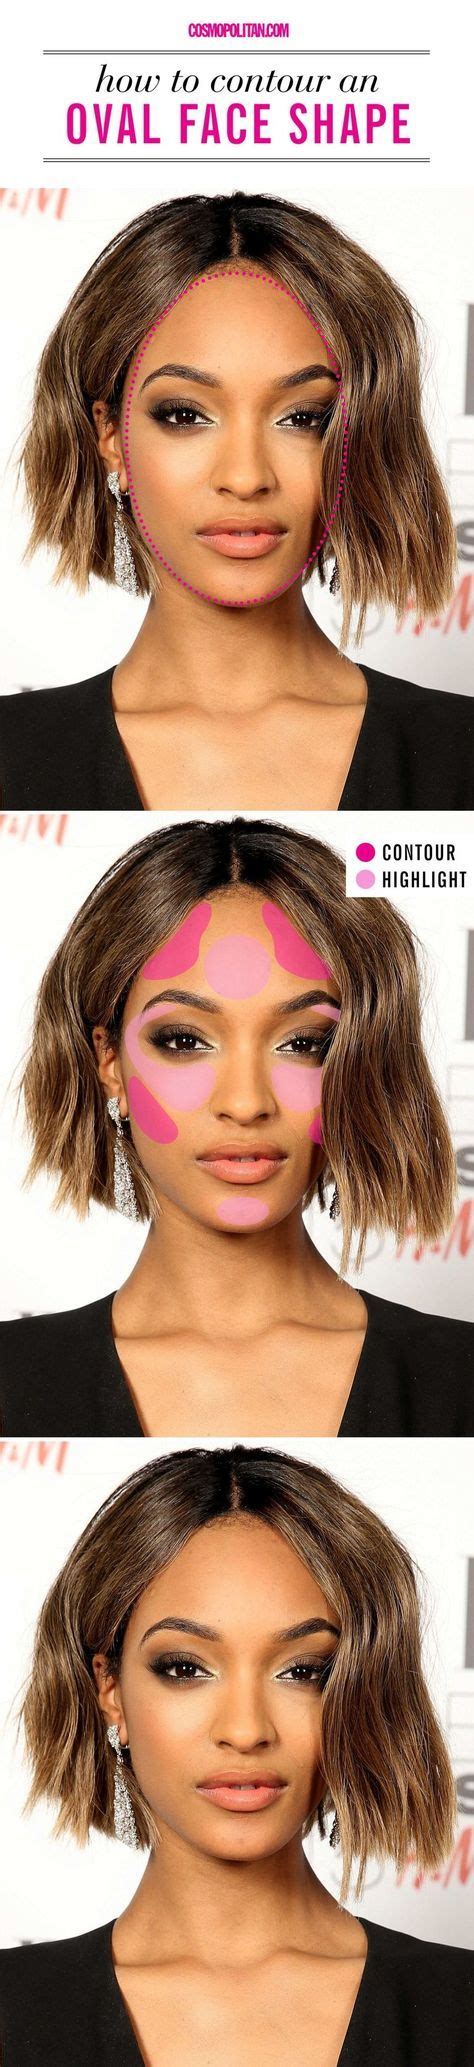 With your darker contour colour, you. Surprise! 2020 Is the Year You Finally Learn How to Contour (With images) | Contour makeup, Face ...